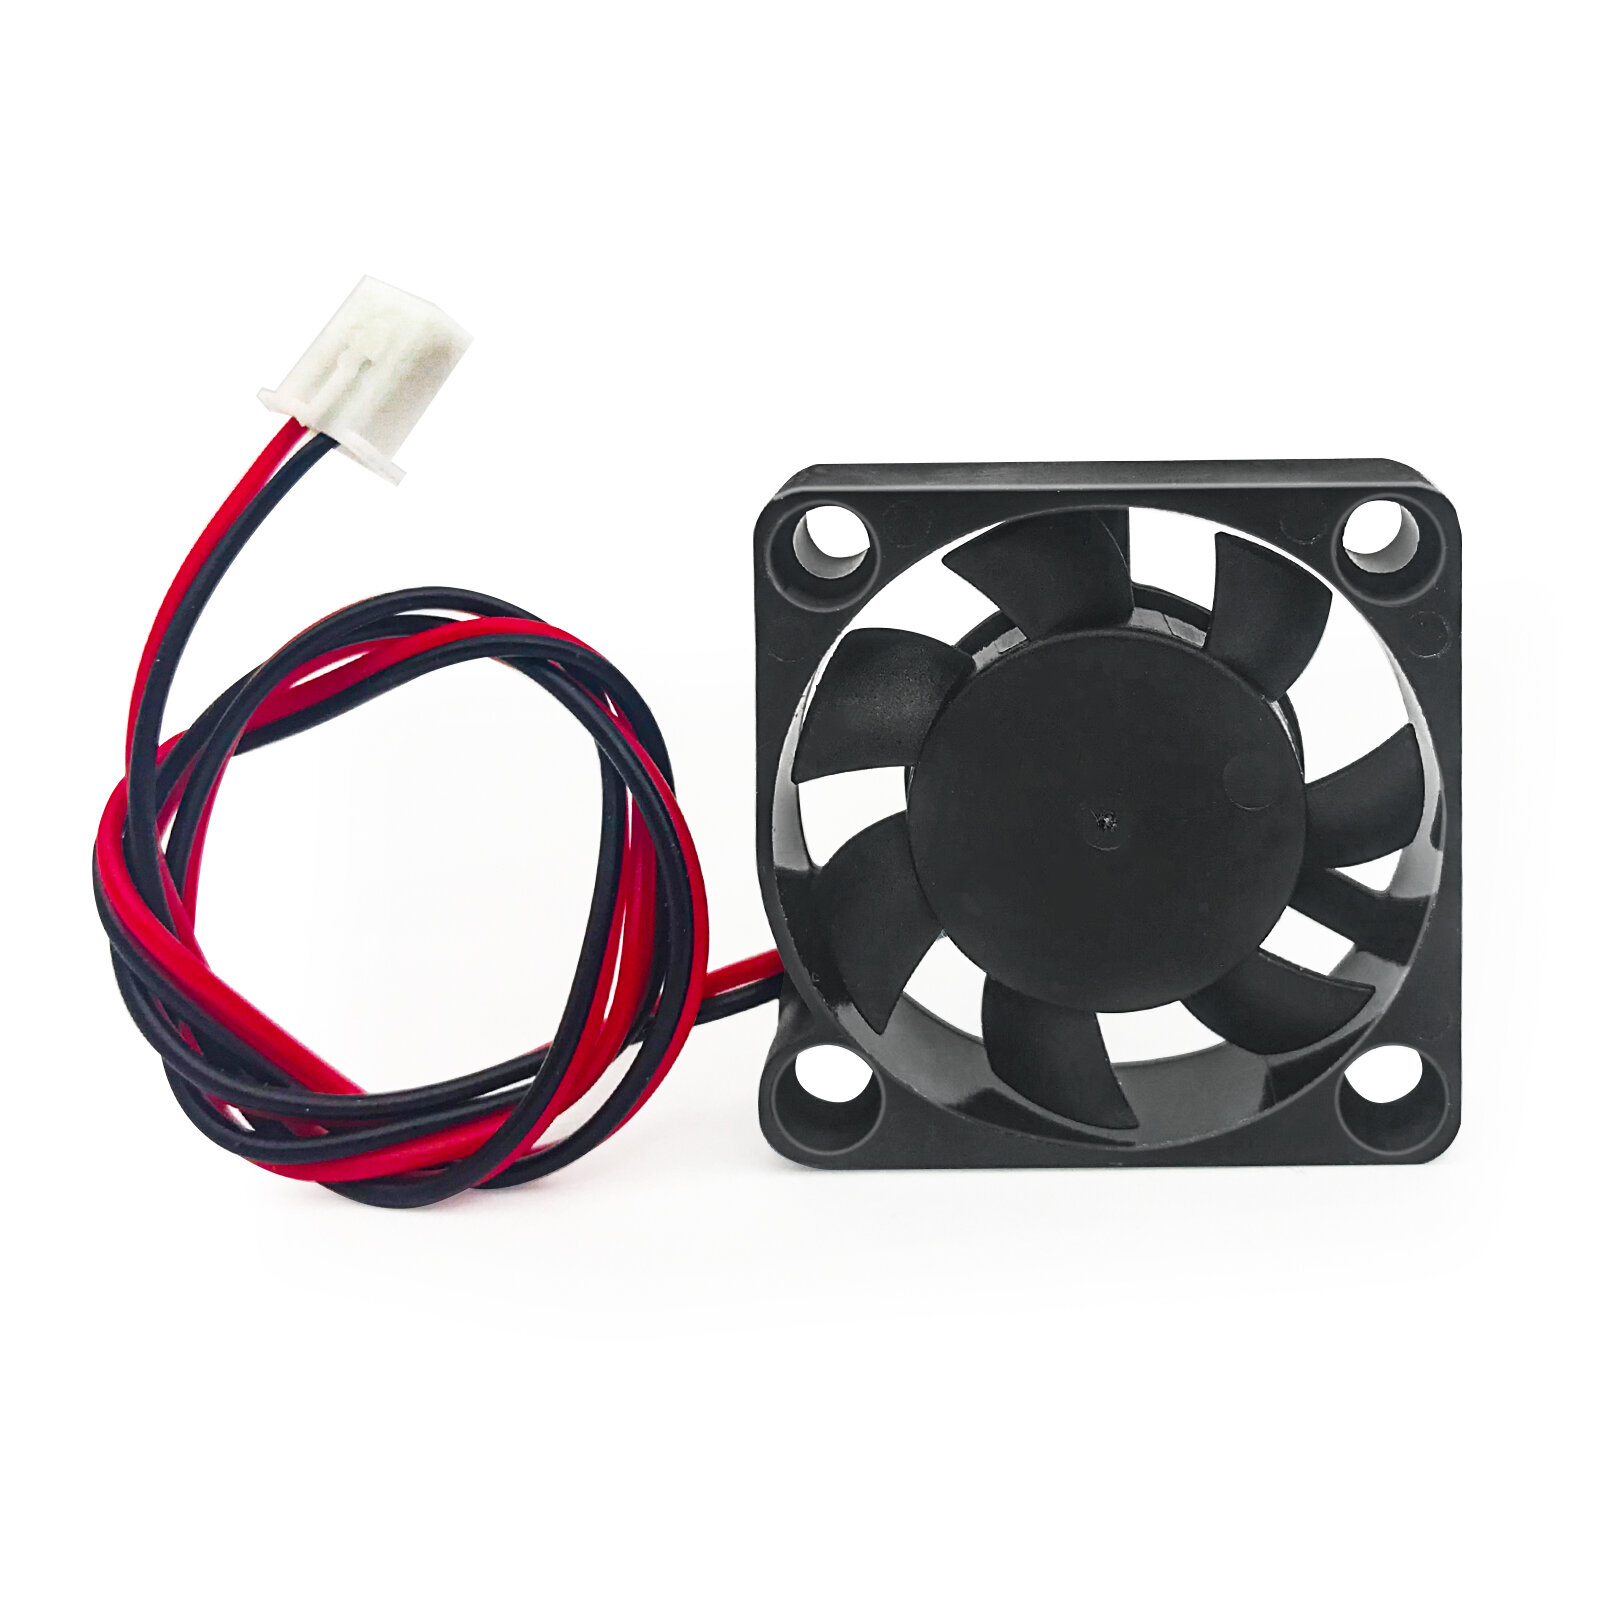 3007 DC5V 2Pin-2.54 Cooling Fan for Voron0/0.1 3D Printer Accessories